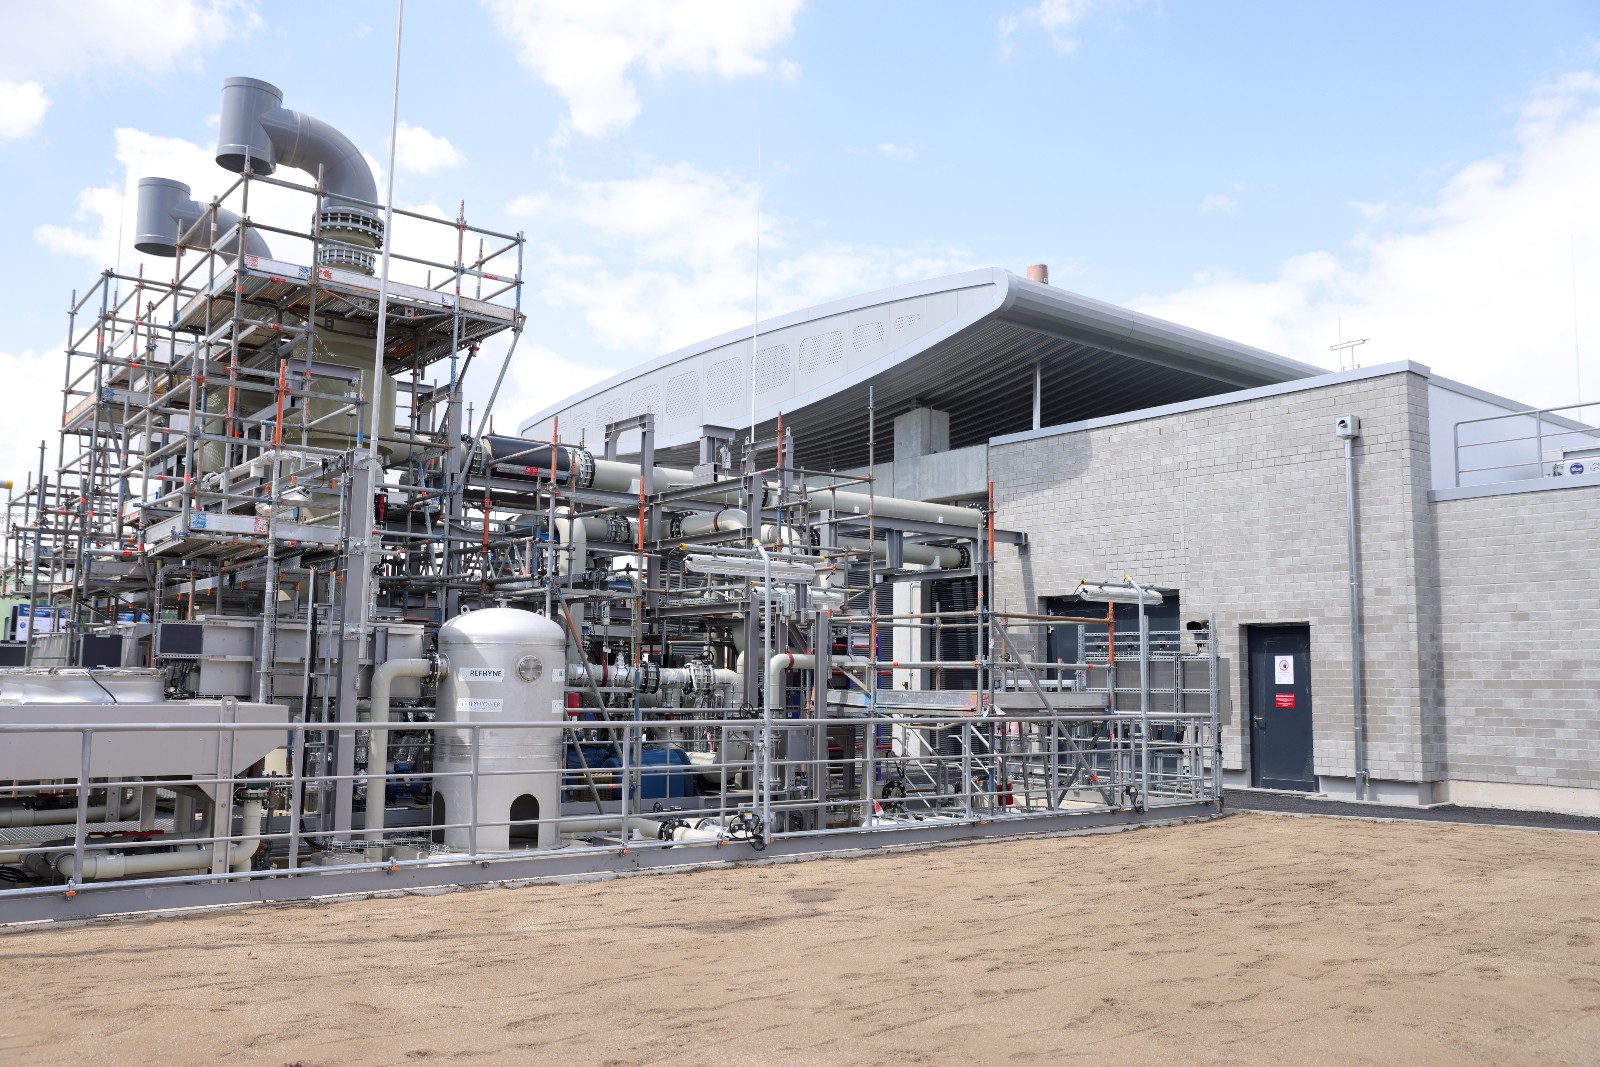 A green-tech "REFHYNE" hydrogen production plant at the Shell Energy and Chemicals Park Rheinland on July 02, 2021 in Wesseling, Germany.